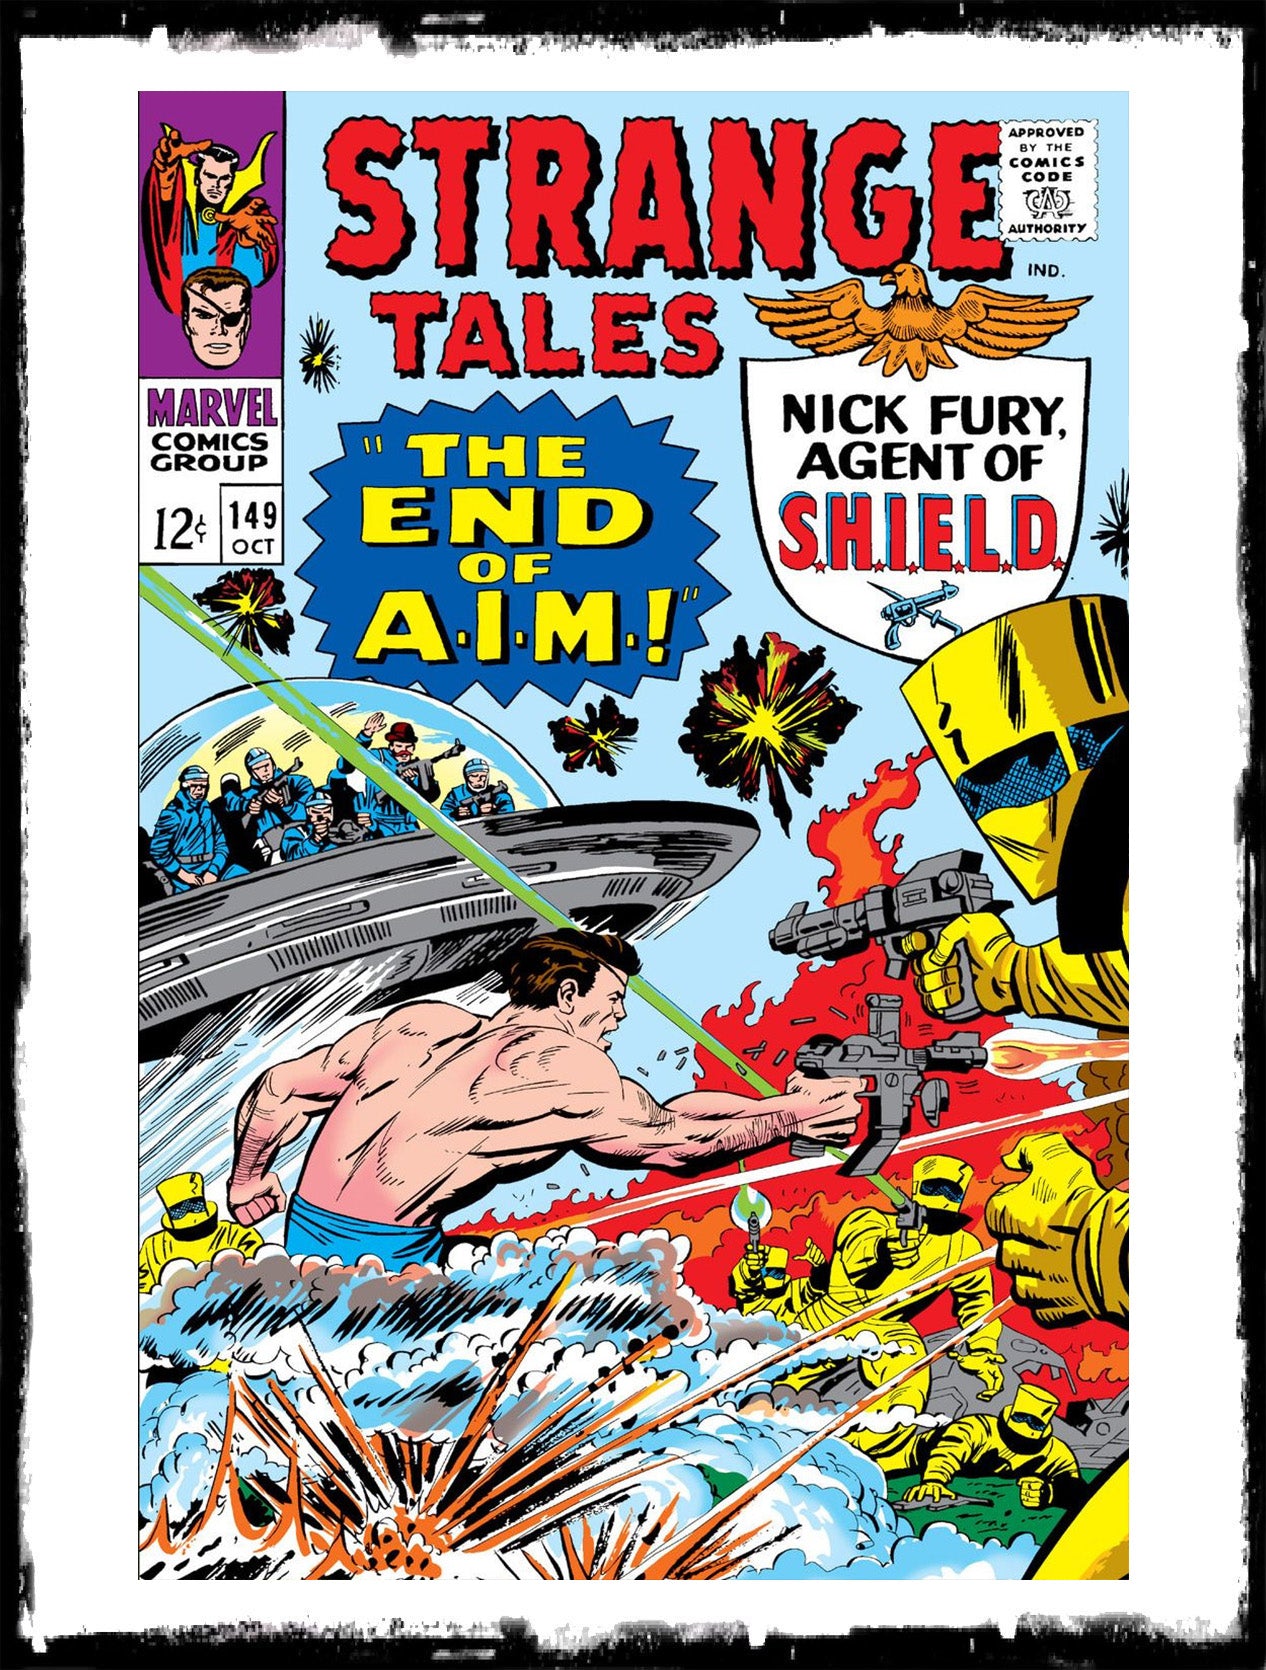 STRANGE TALES - #149 "THE END OF A.I.M." (1966 - VG/FN)